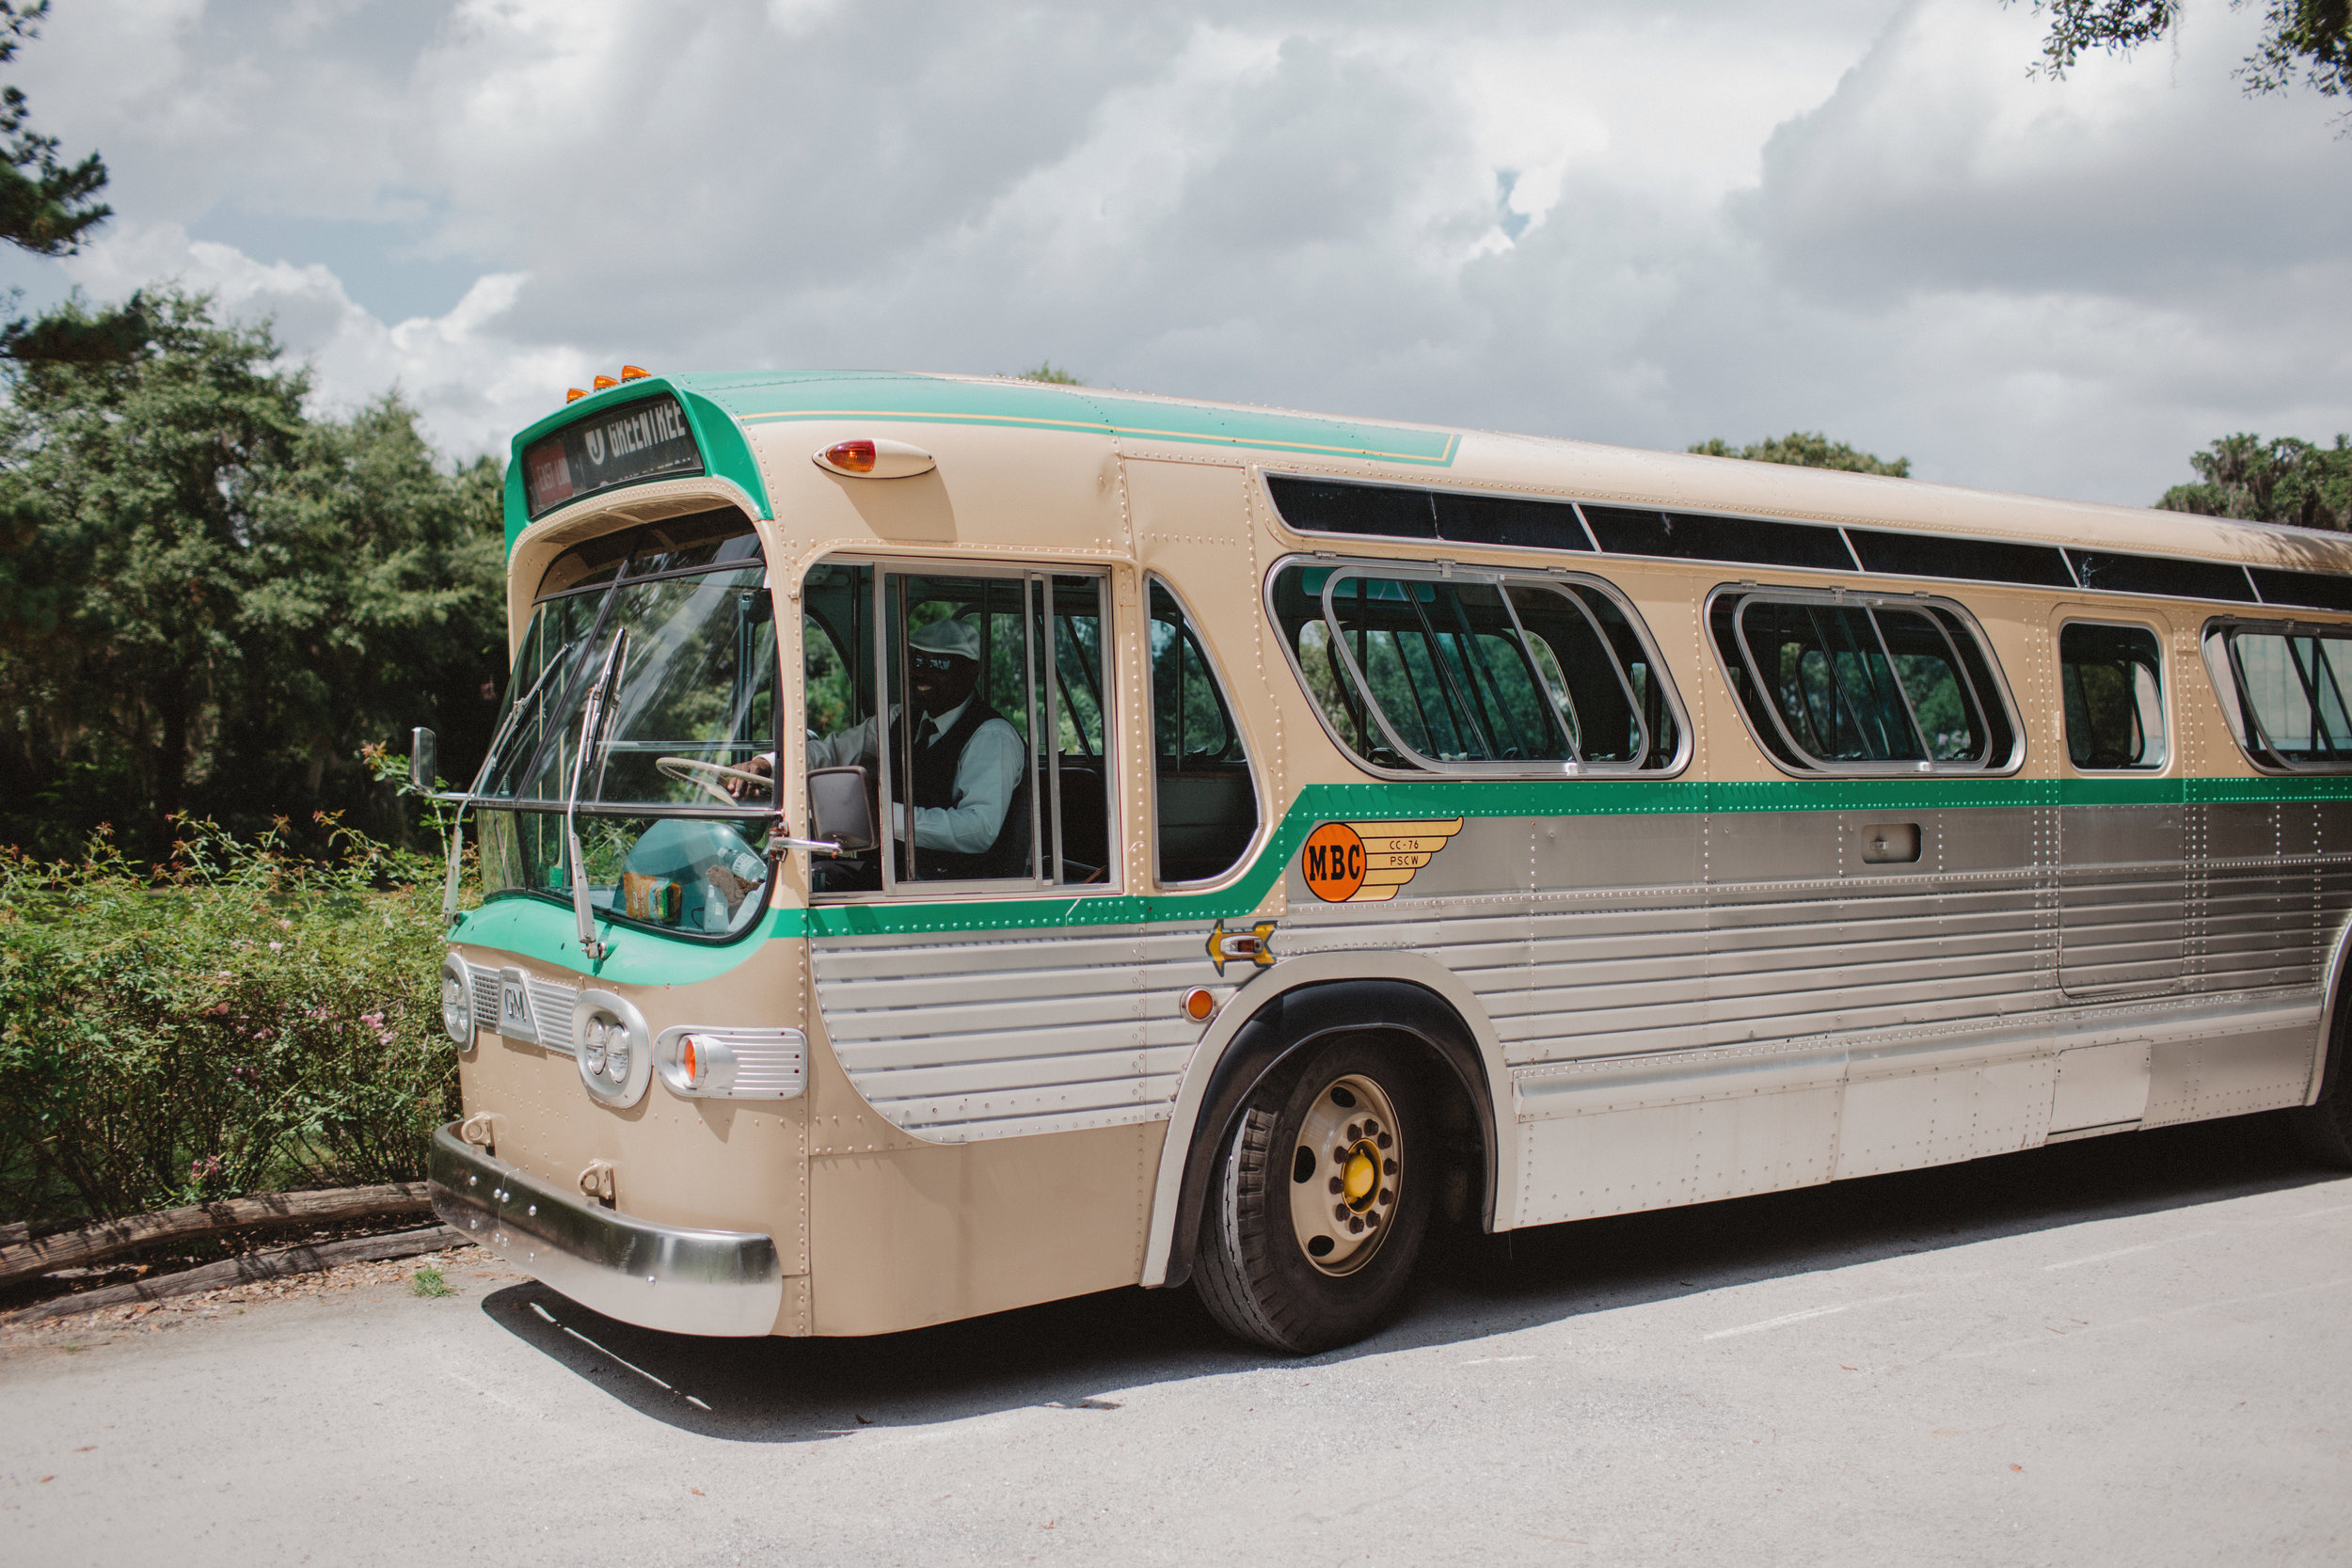 1966 General Motor Bus - by Lowcountry Valet & Shuttle Co.